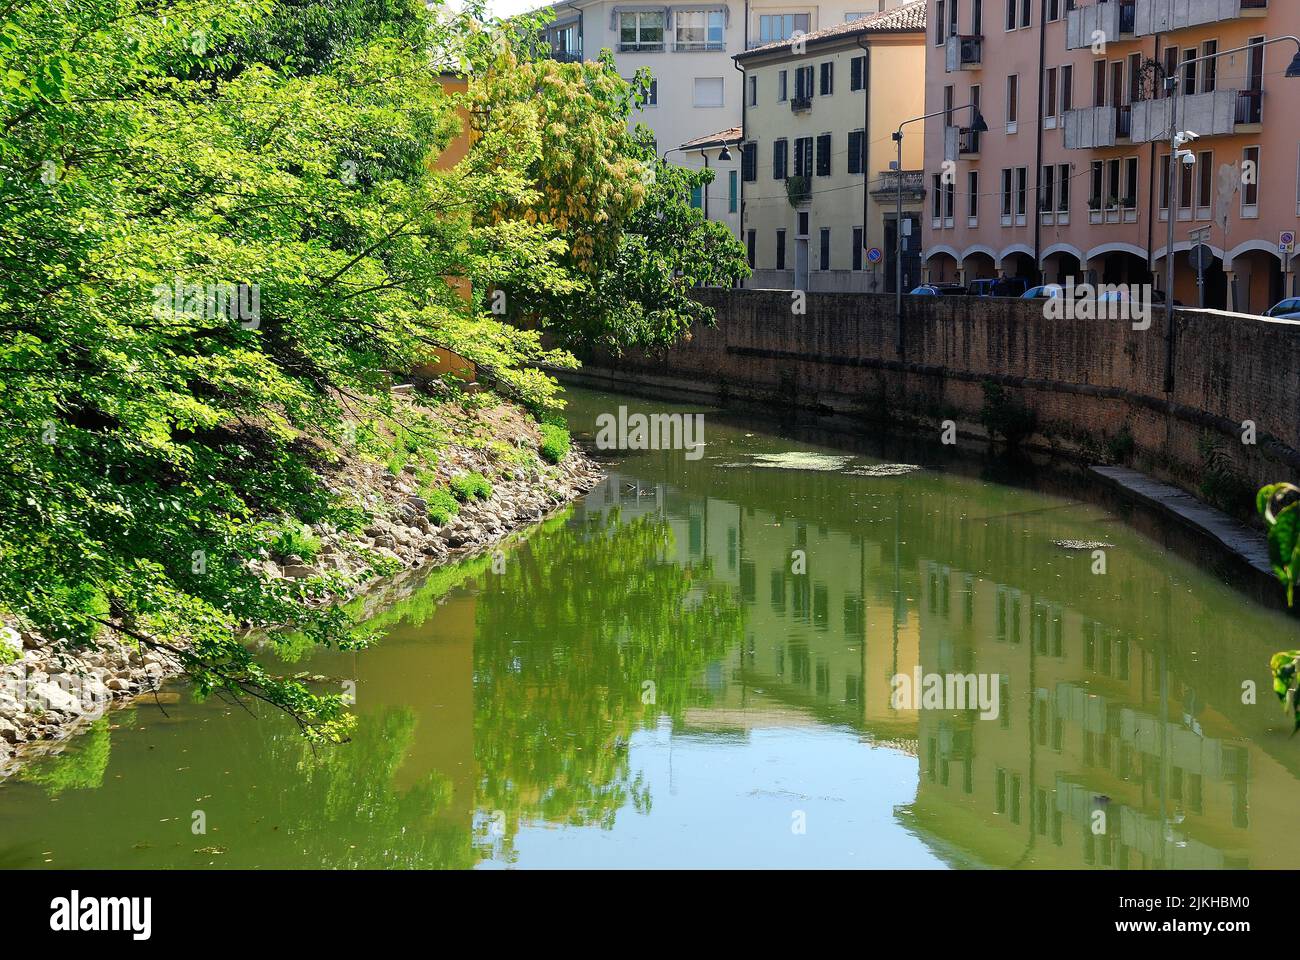 Padua, Veneto, Italy. Padua is a town crossed by many canals. Stock Photo